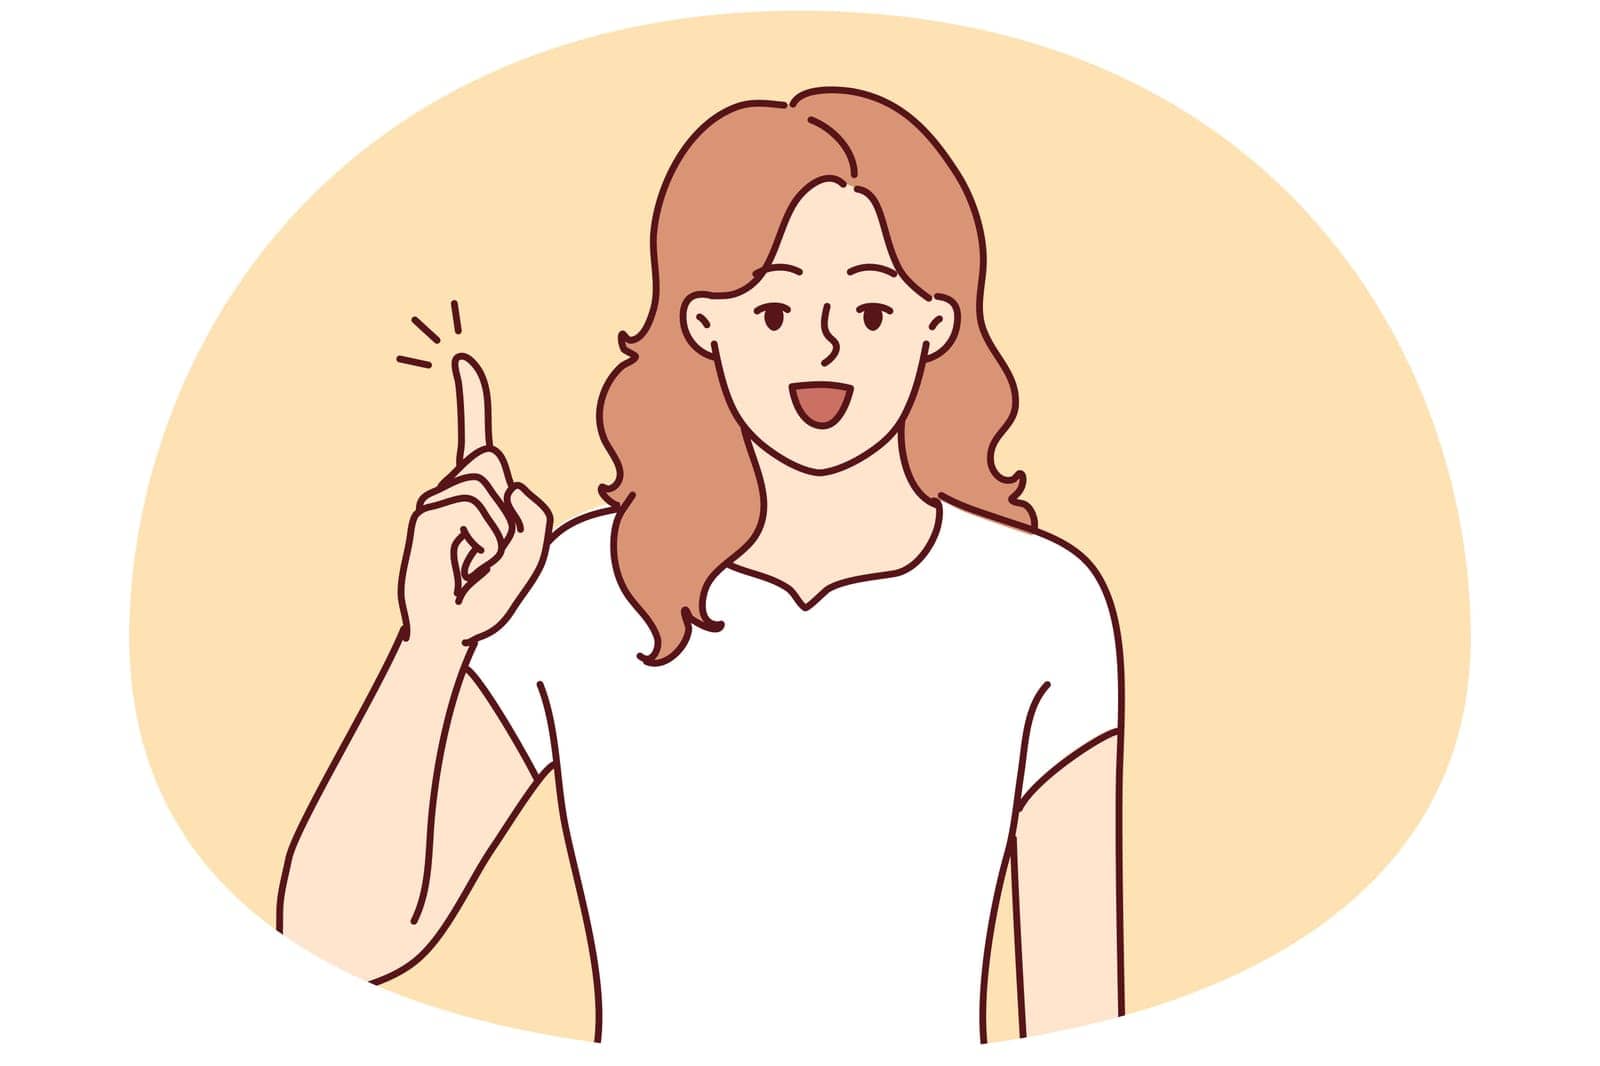 Smiling young woman hold finger up develop good idea. Happy motivated female generate issue solve problem. Vector illustration.